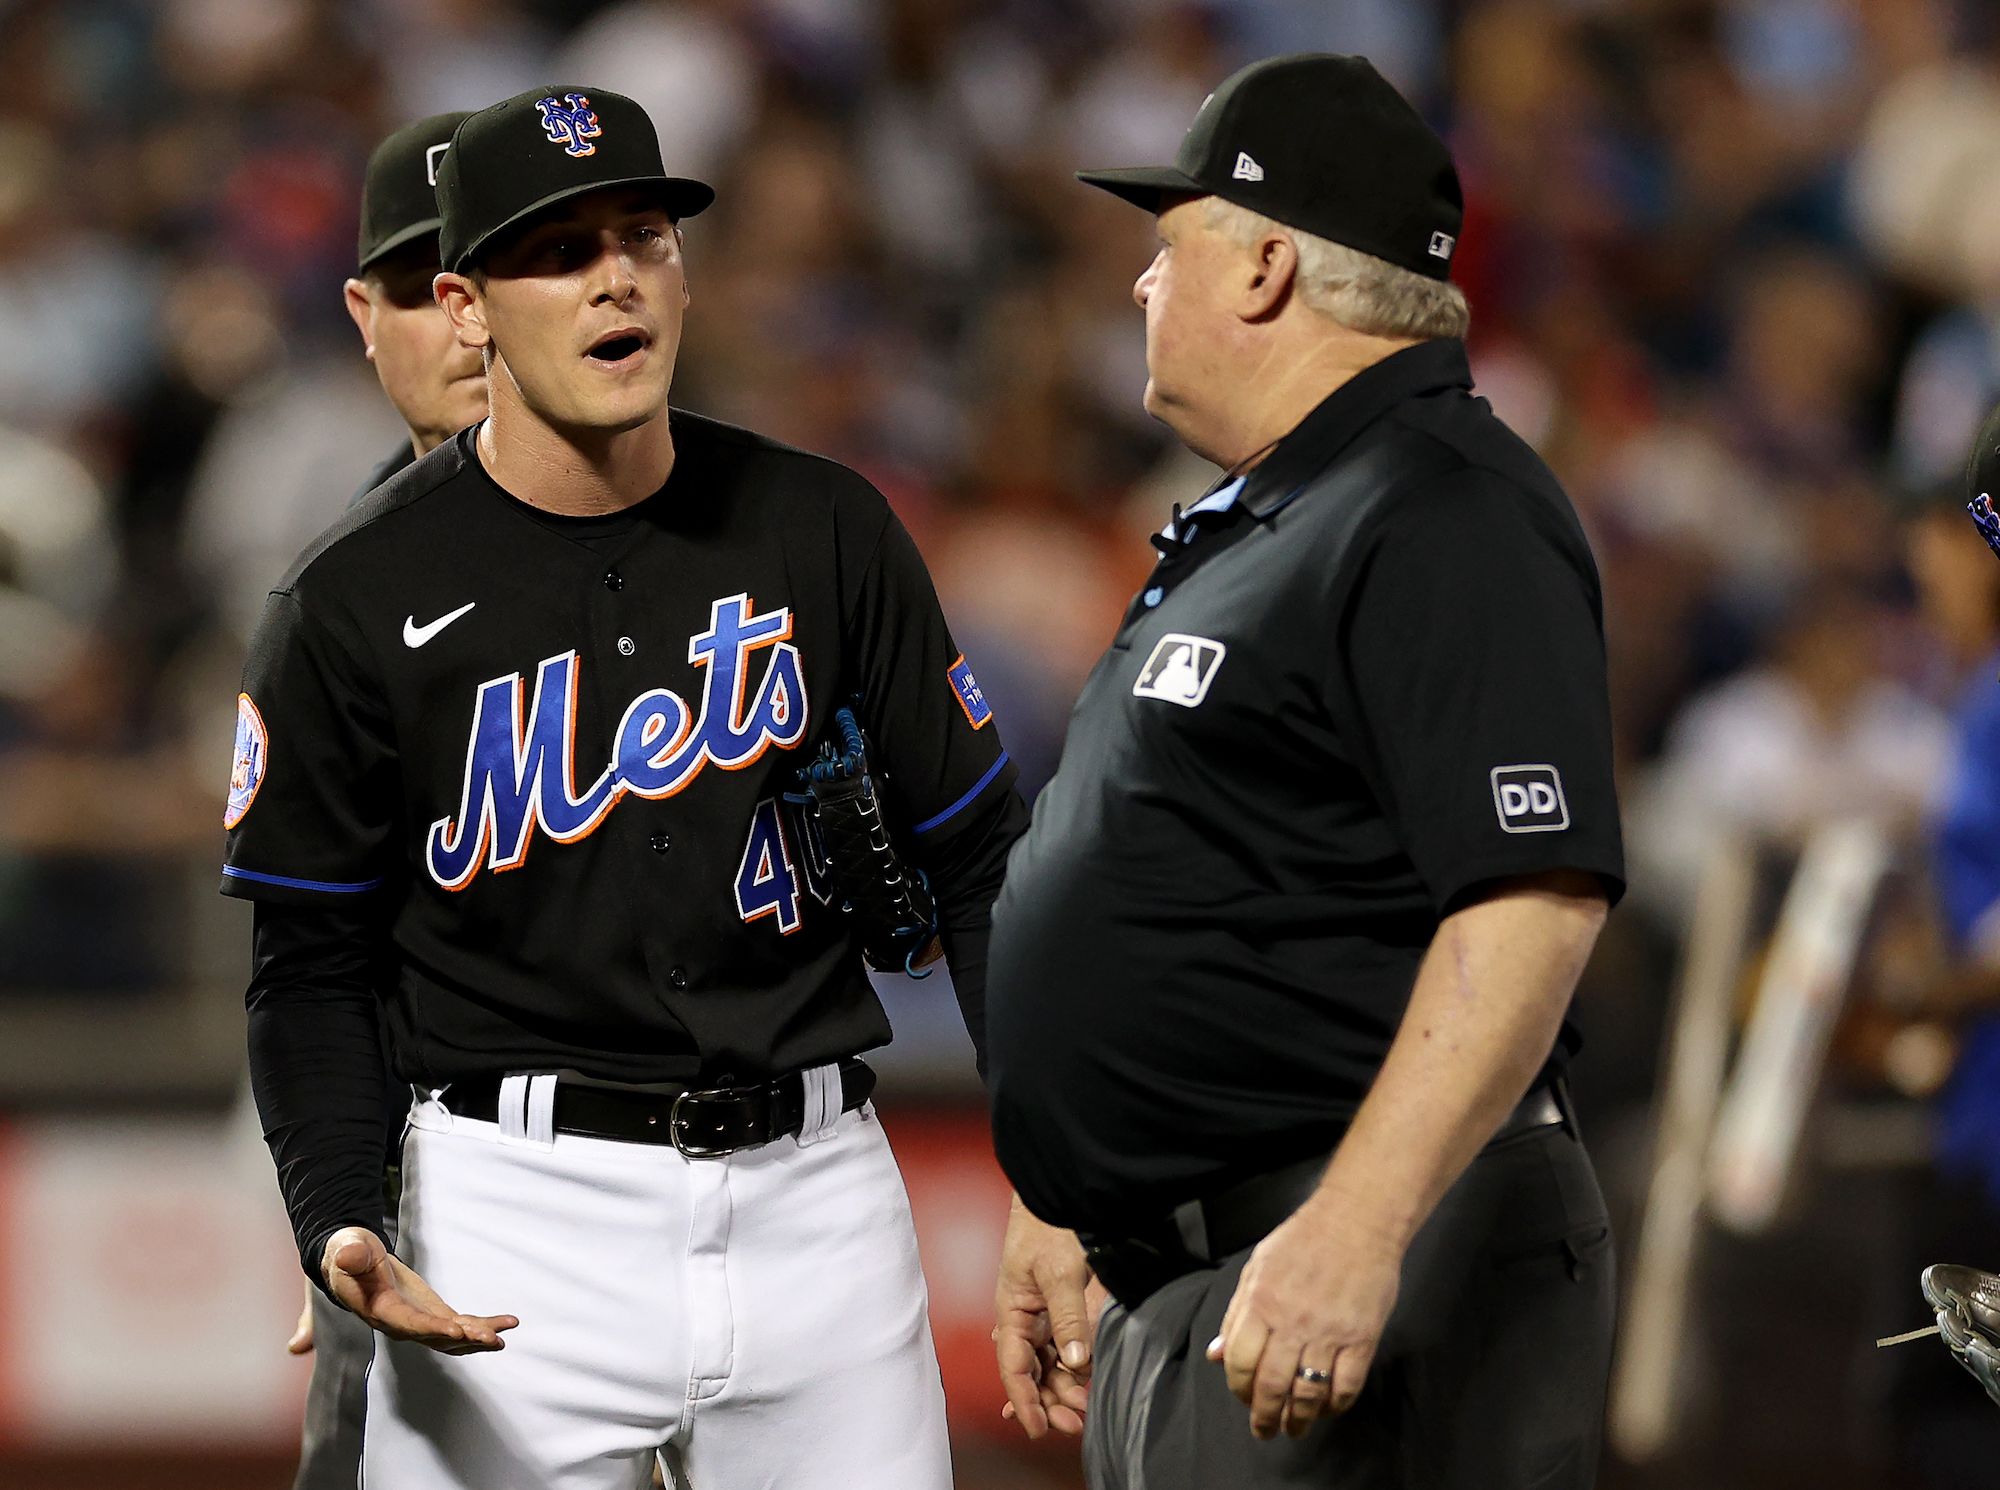 Drew Smith: New York Mets pitcher suspended for 10 games after